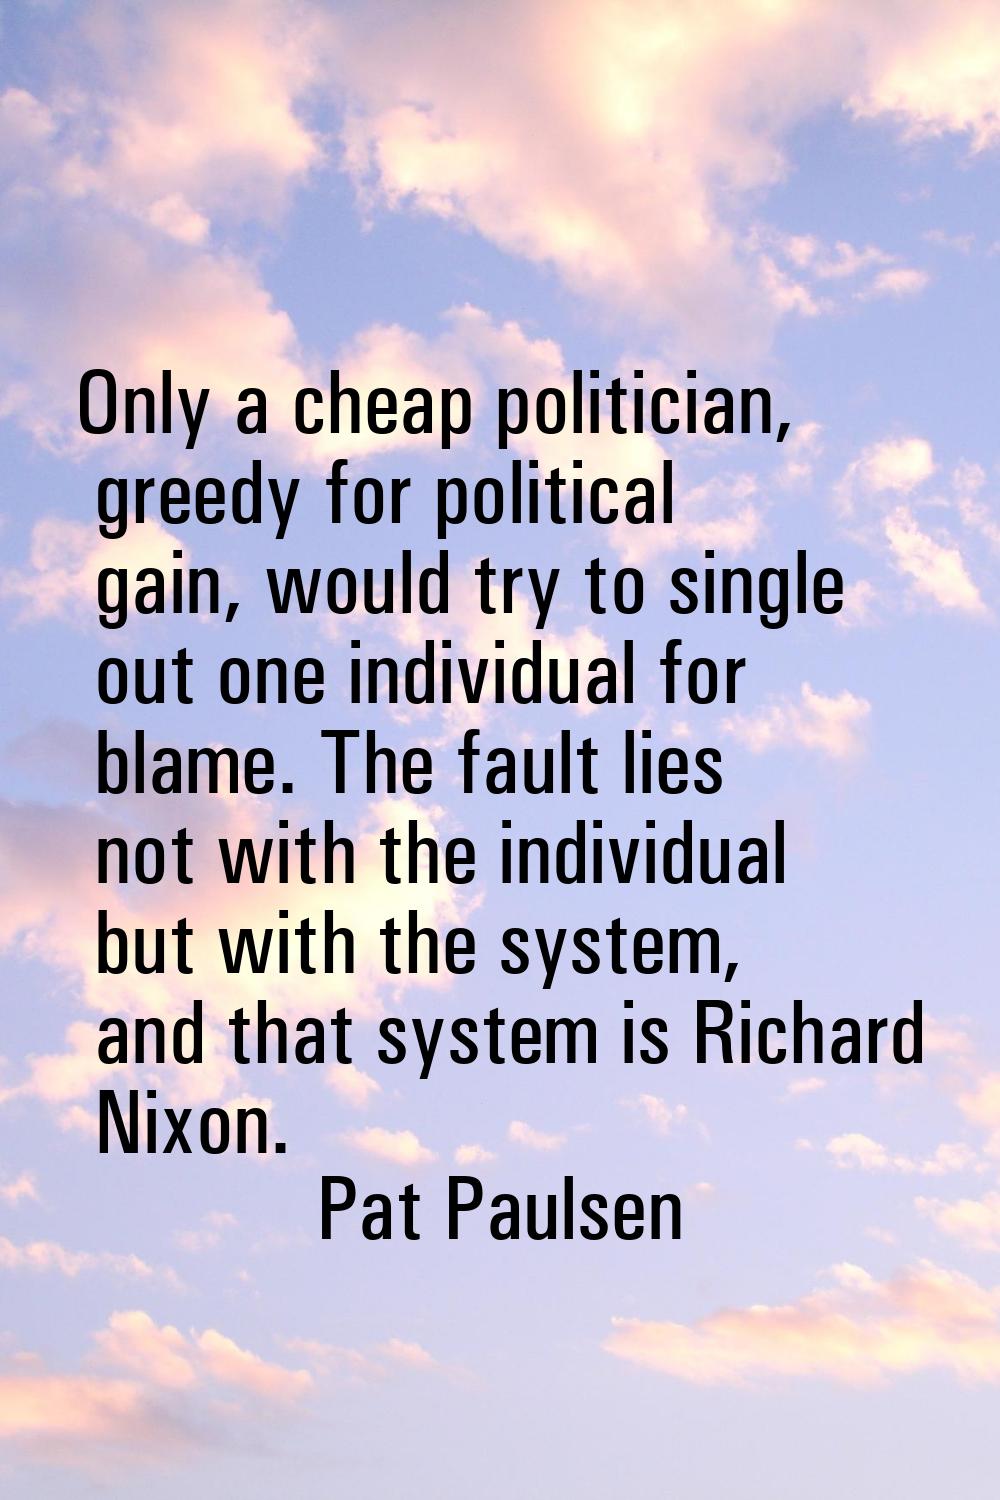 Only a cheap politician, greedy for political gain, would try to single out one individual for blam